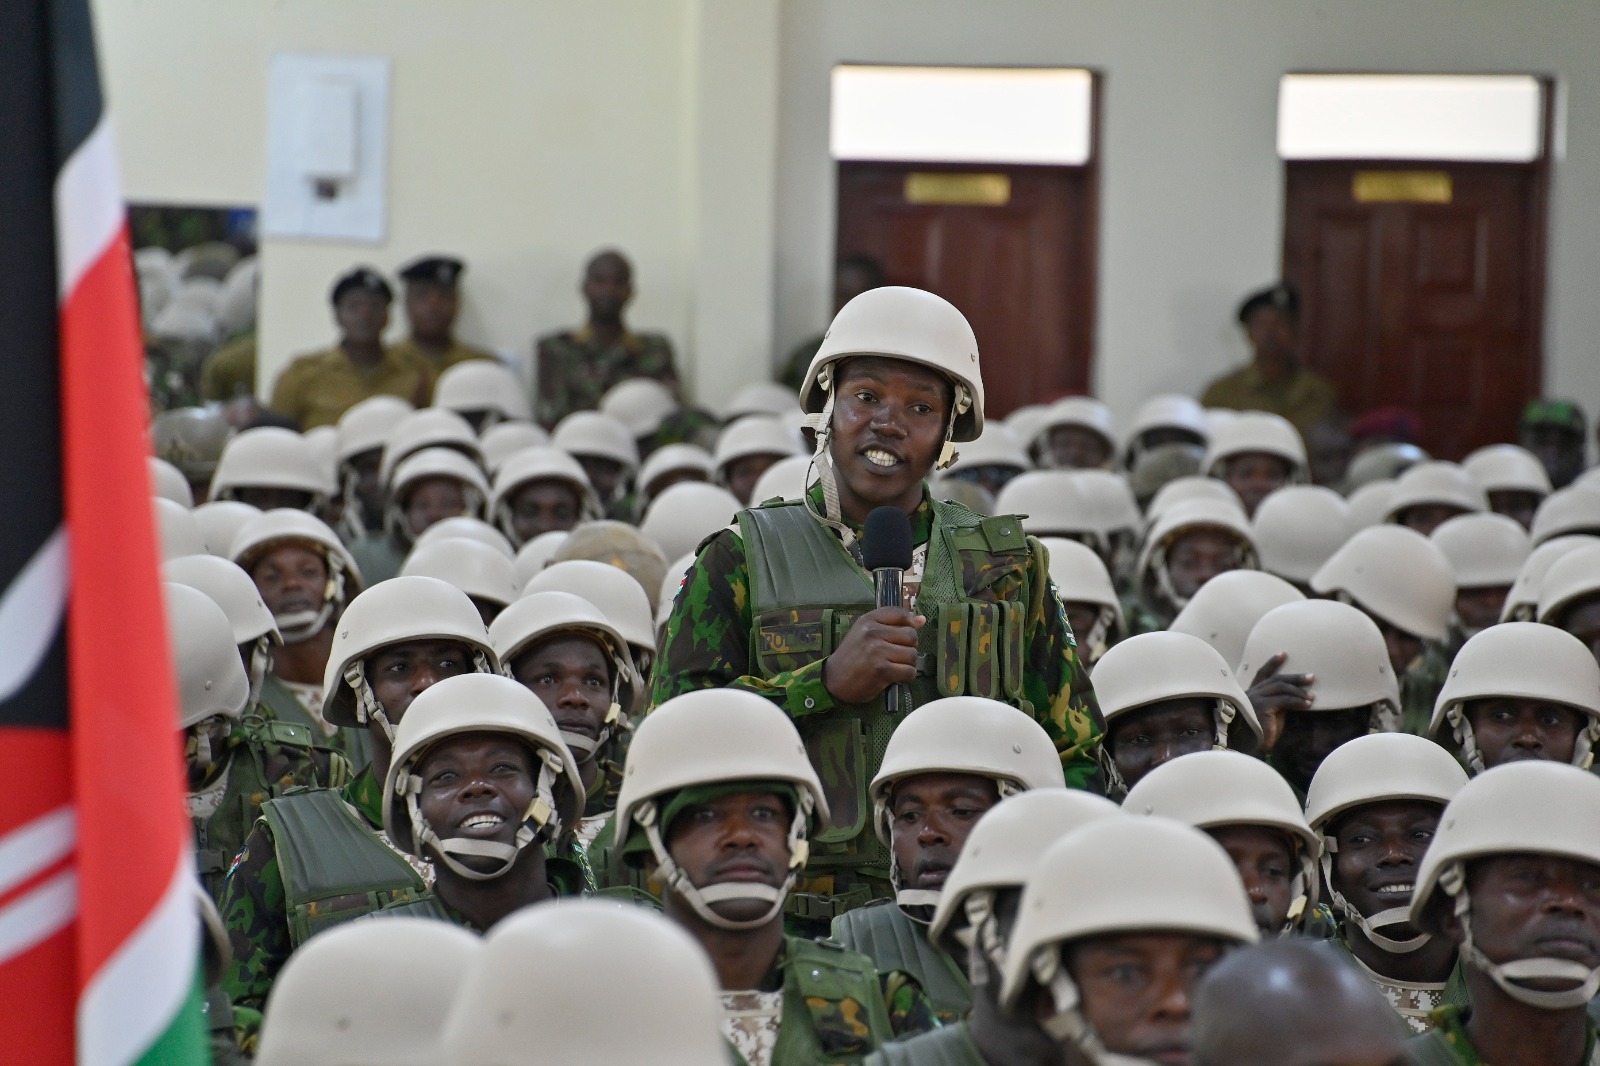 Kenya’s role in peace-making and conflict resolution, focusing on the deployment of Kenyan police officers to Haiti.